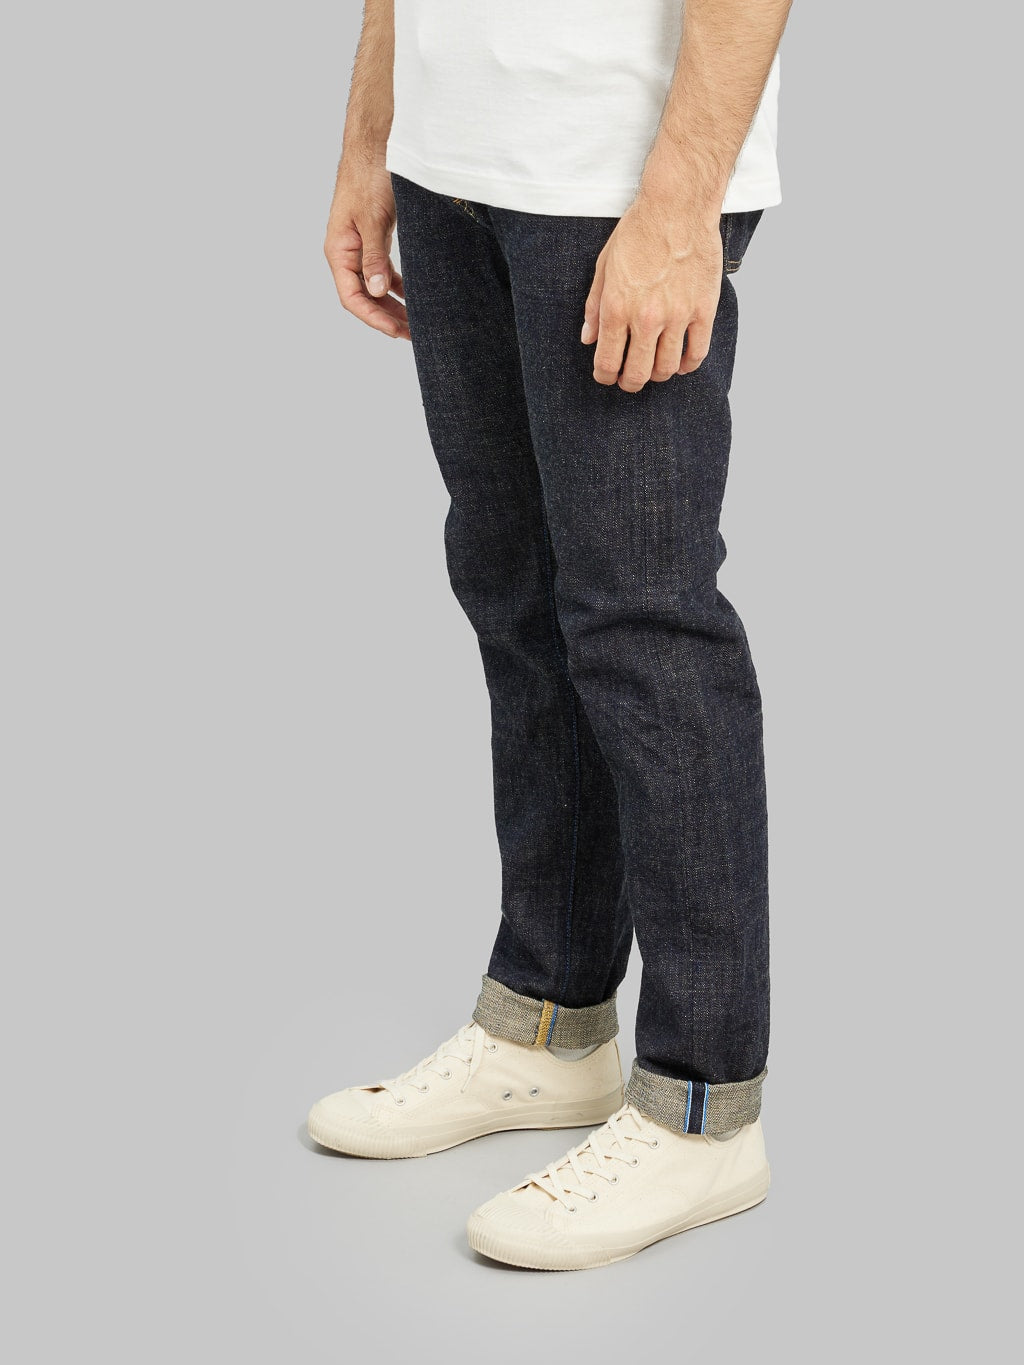 Tanuki Zetto Benkei High Tapered Jeans side fit